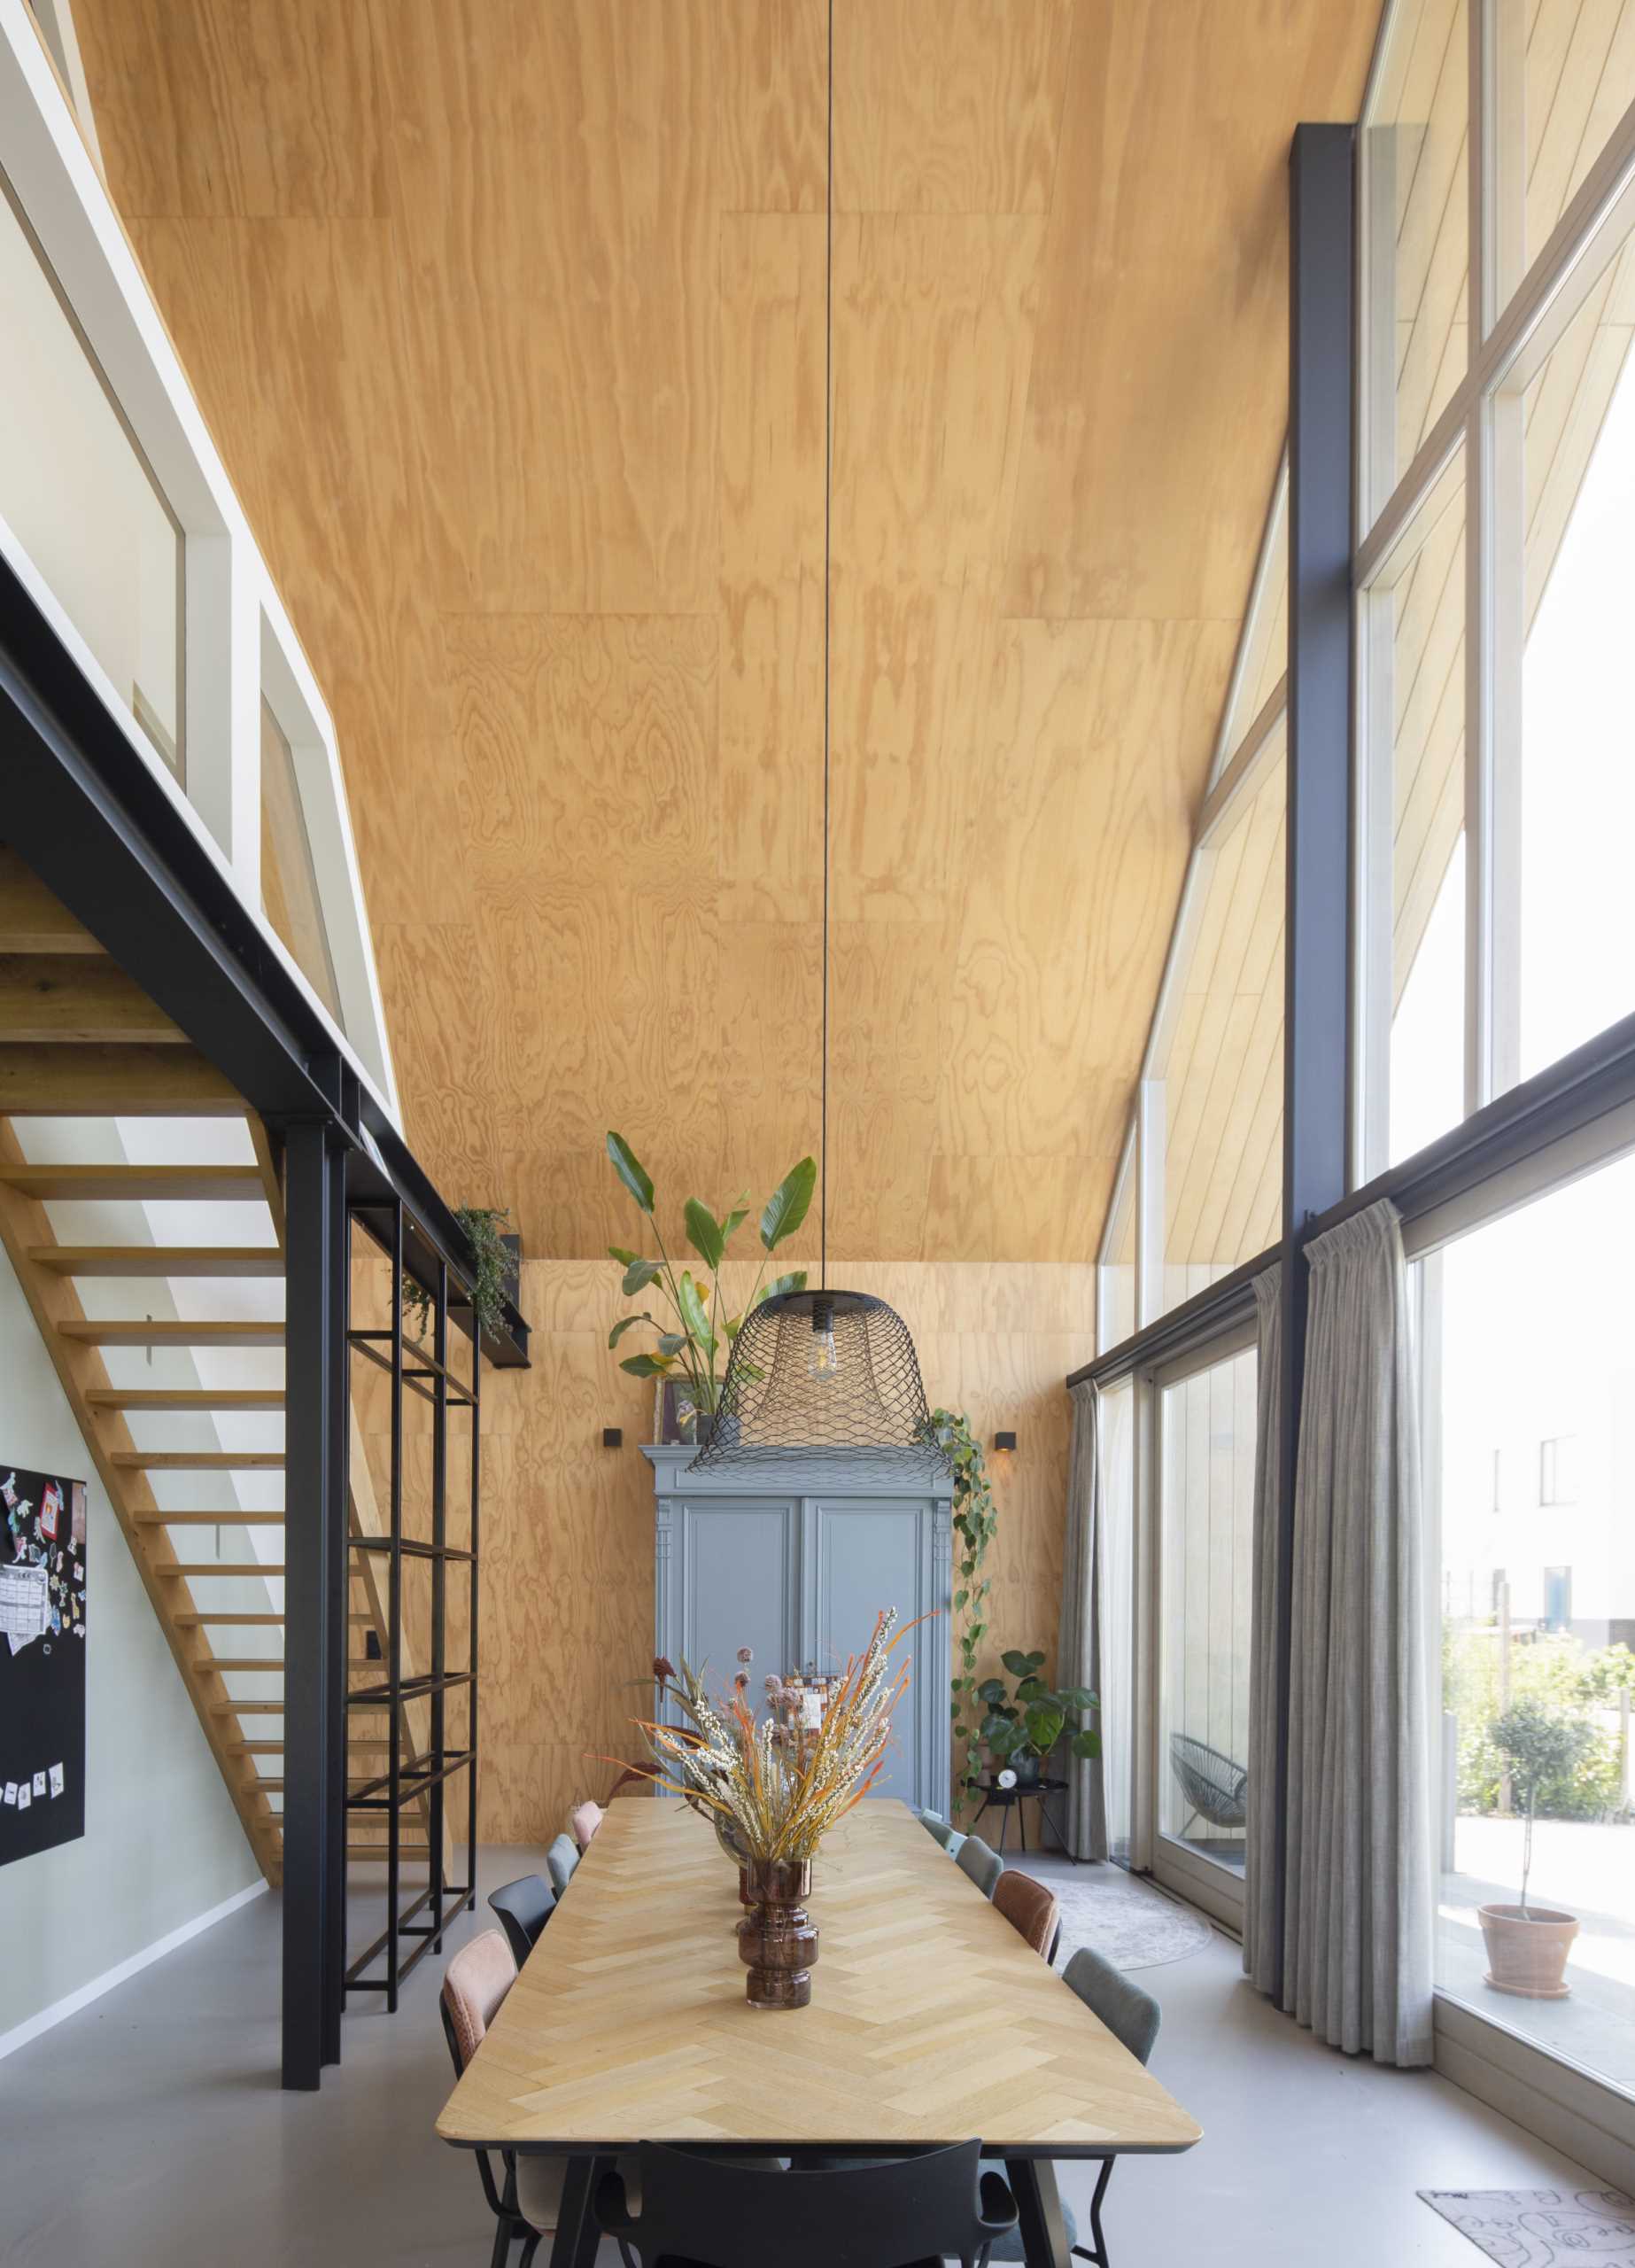 Plywood has been used as a design element in this dining area, and it that continues from the wall to the ceiling, and onto the first floor, creating a connection is created between the spaces.